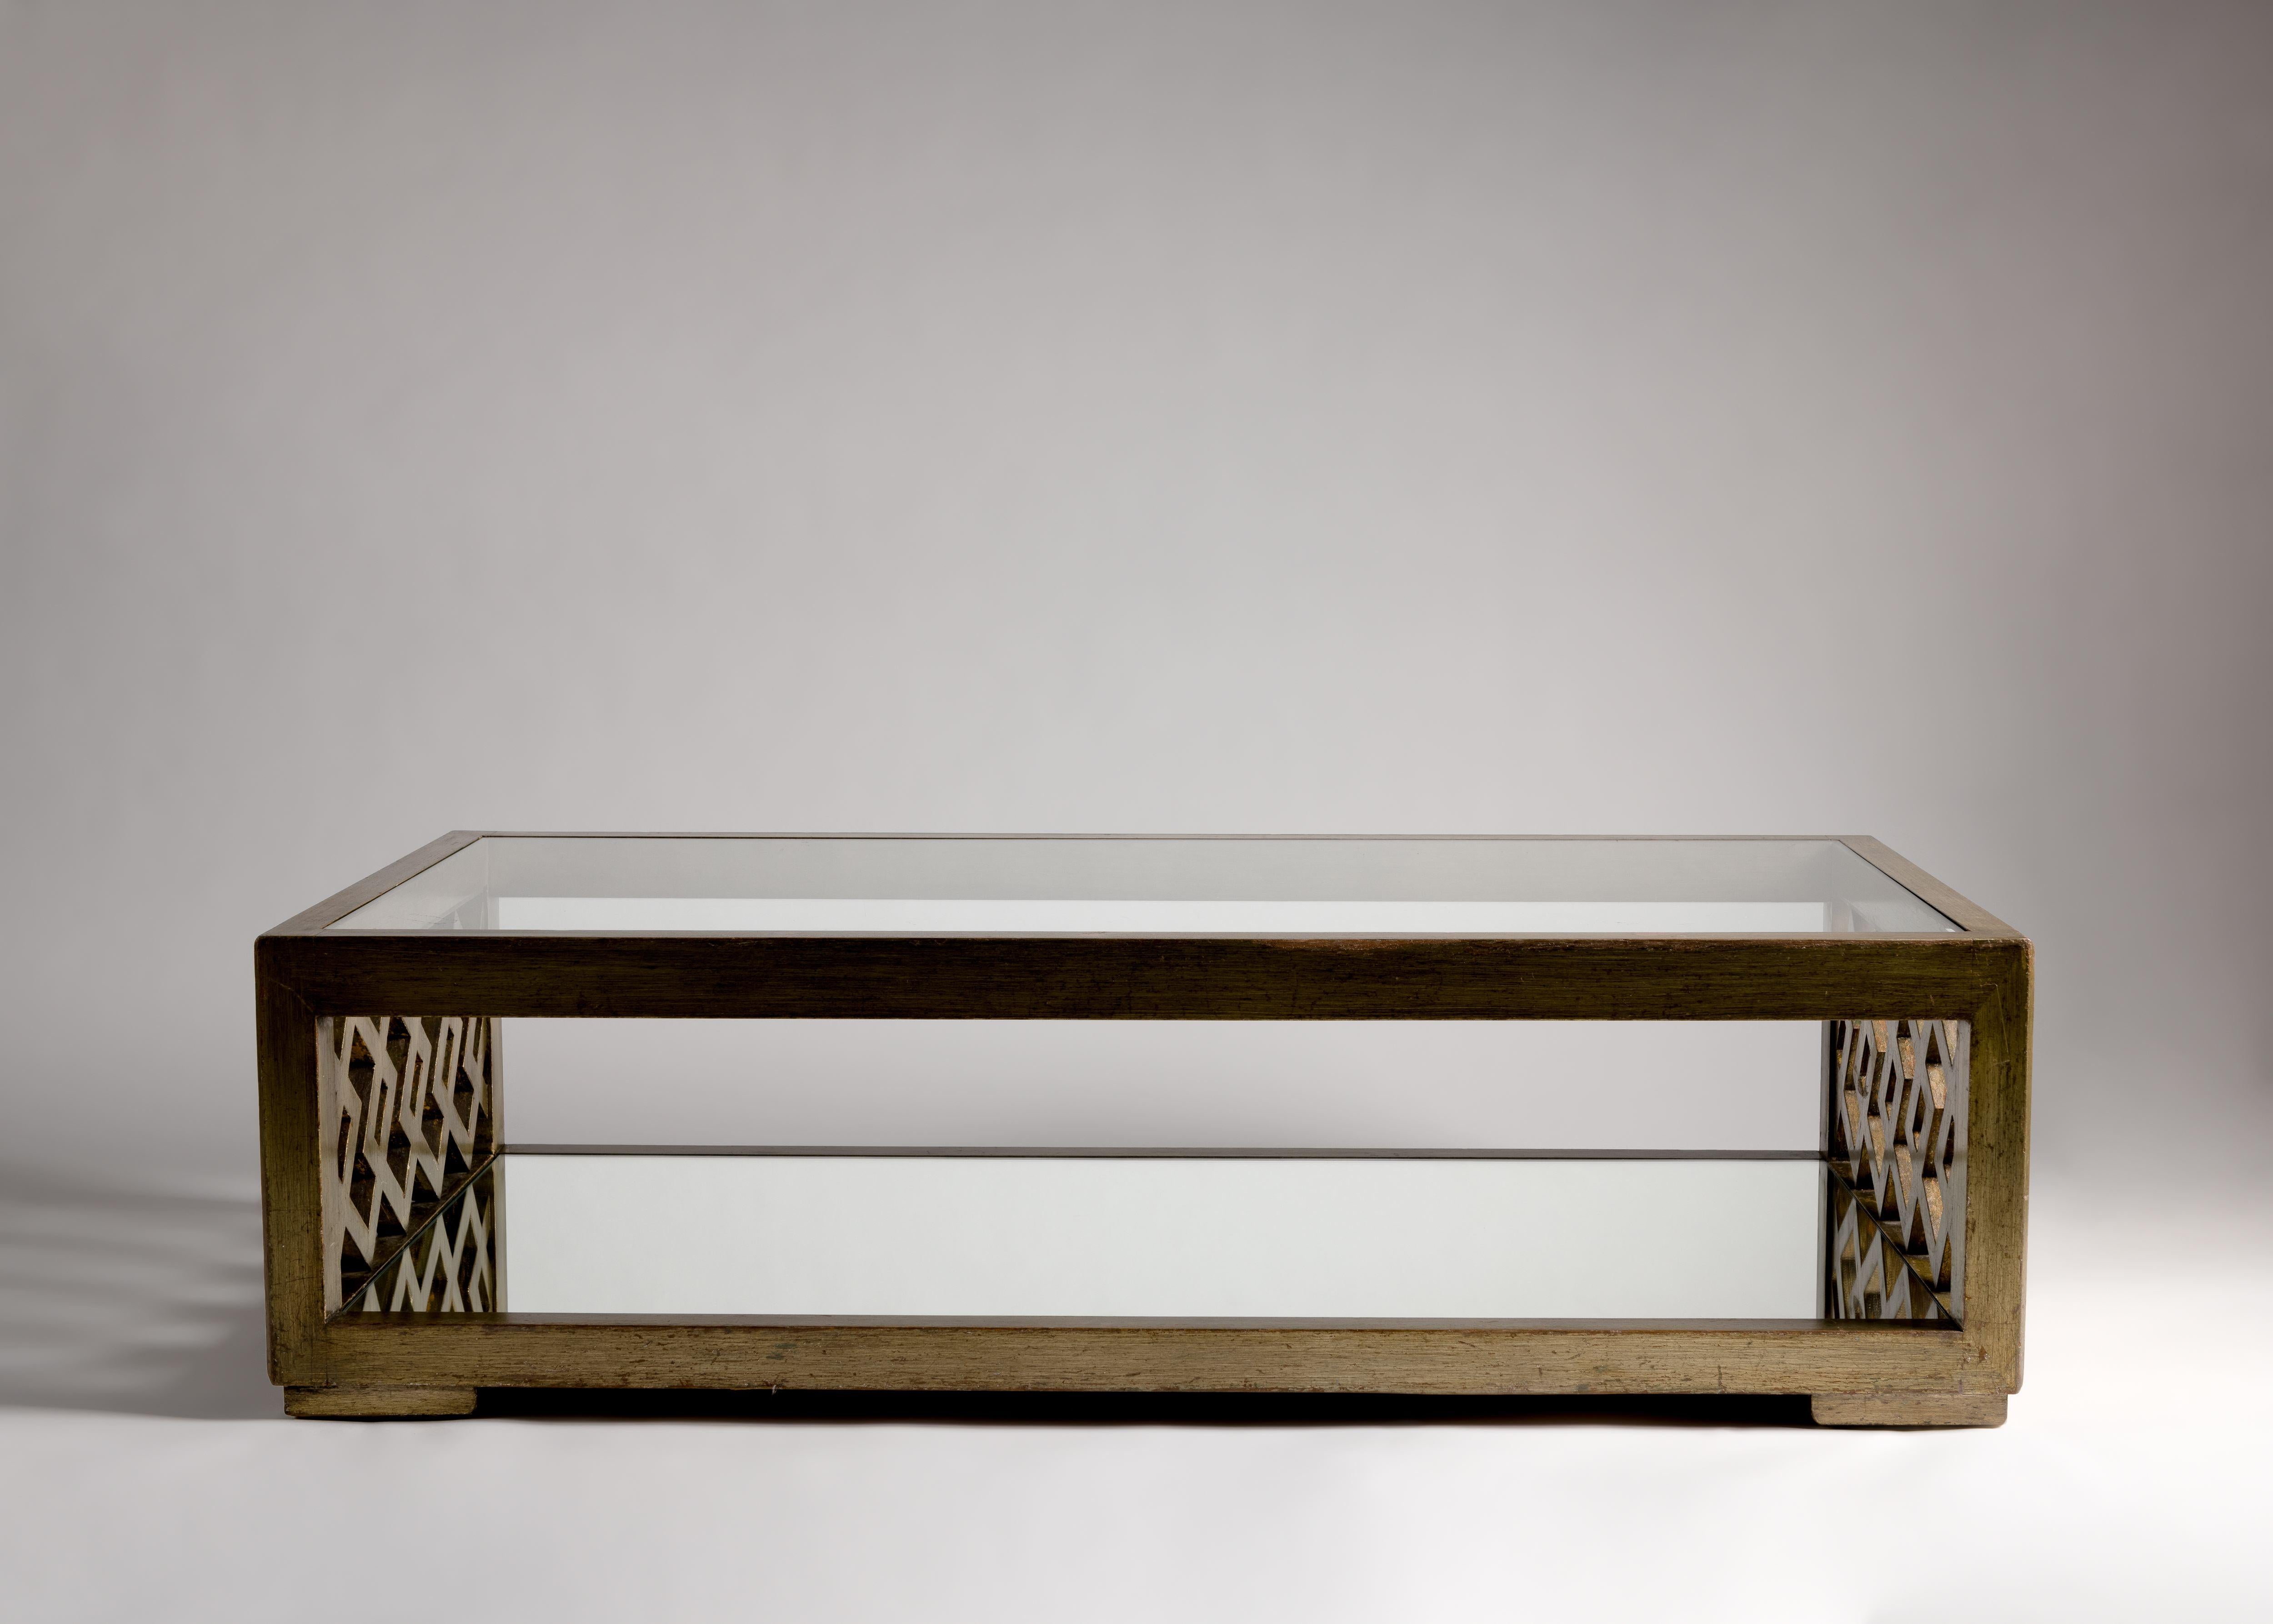 This remarkable coffee table features ends in playful, repeating geometric patterning, which like the rest of its frame, are covered in antiqued silver leaf. Moreover, it boasts two levels -- the top, a broad clear glass, and the bottom a mirror of